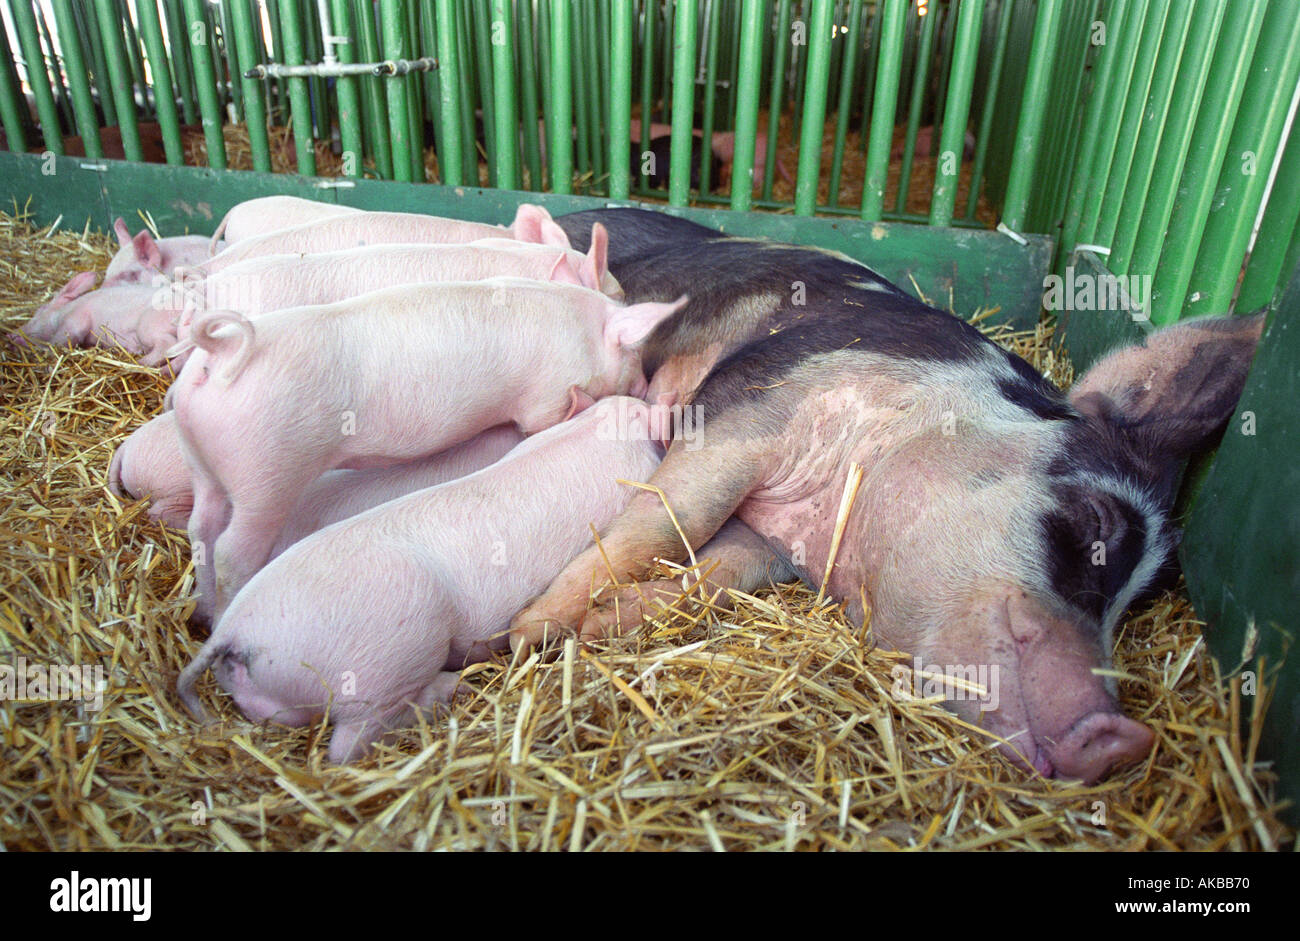 Mother pig with piglets at county fair Stock Photo